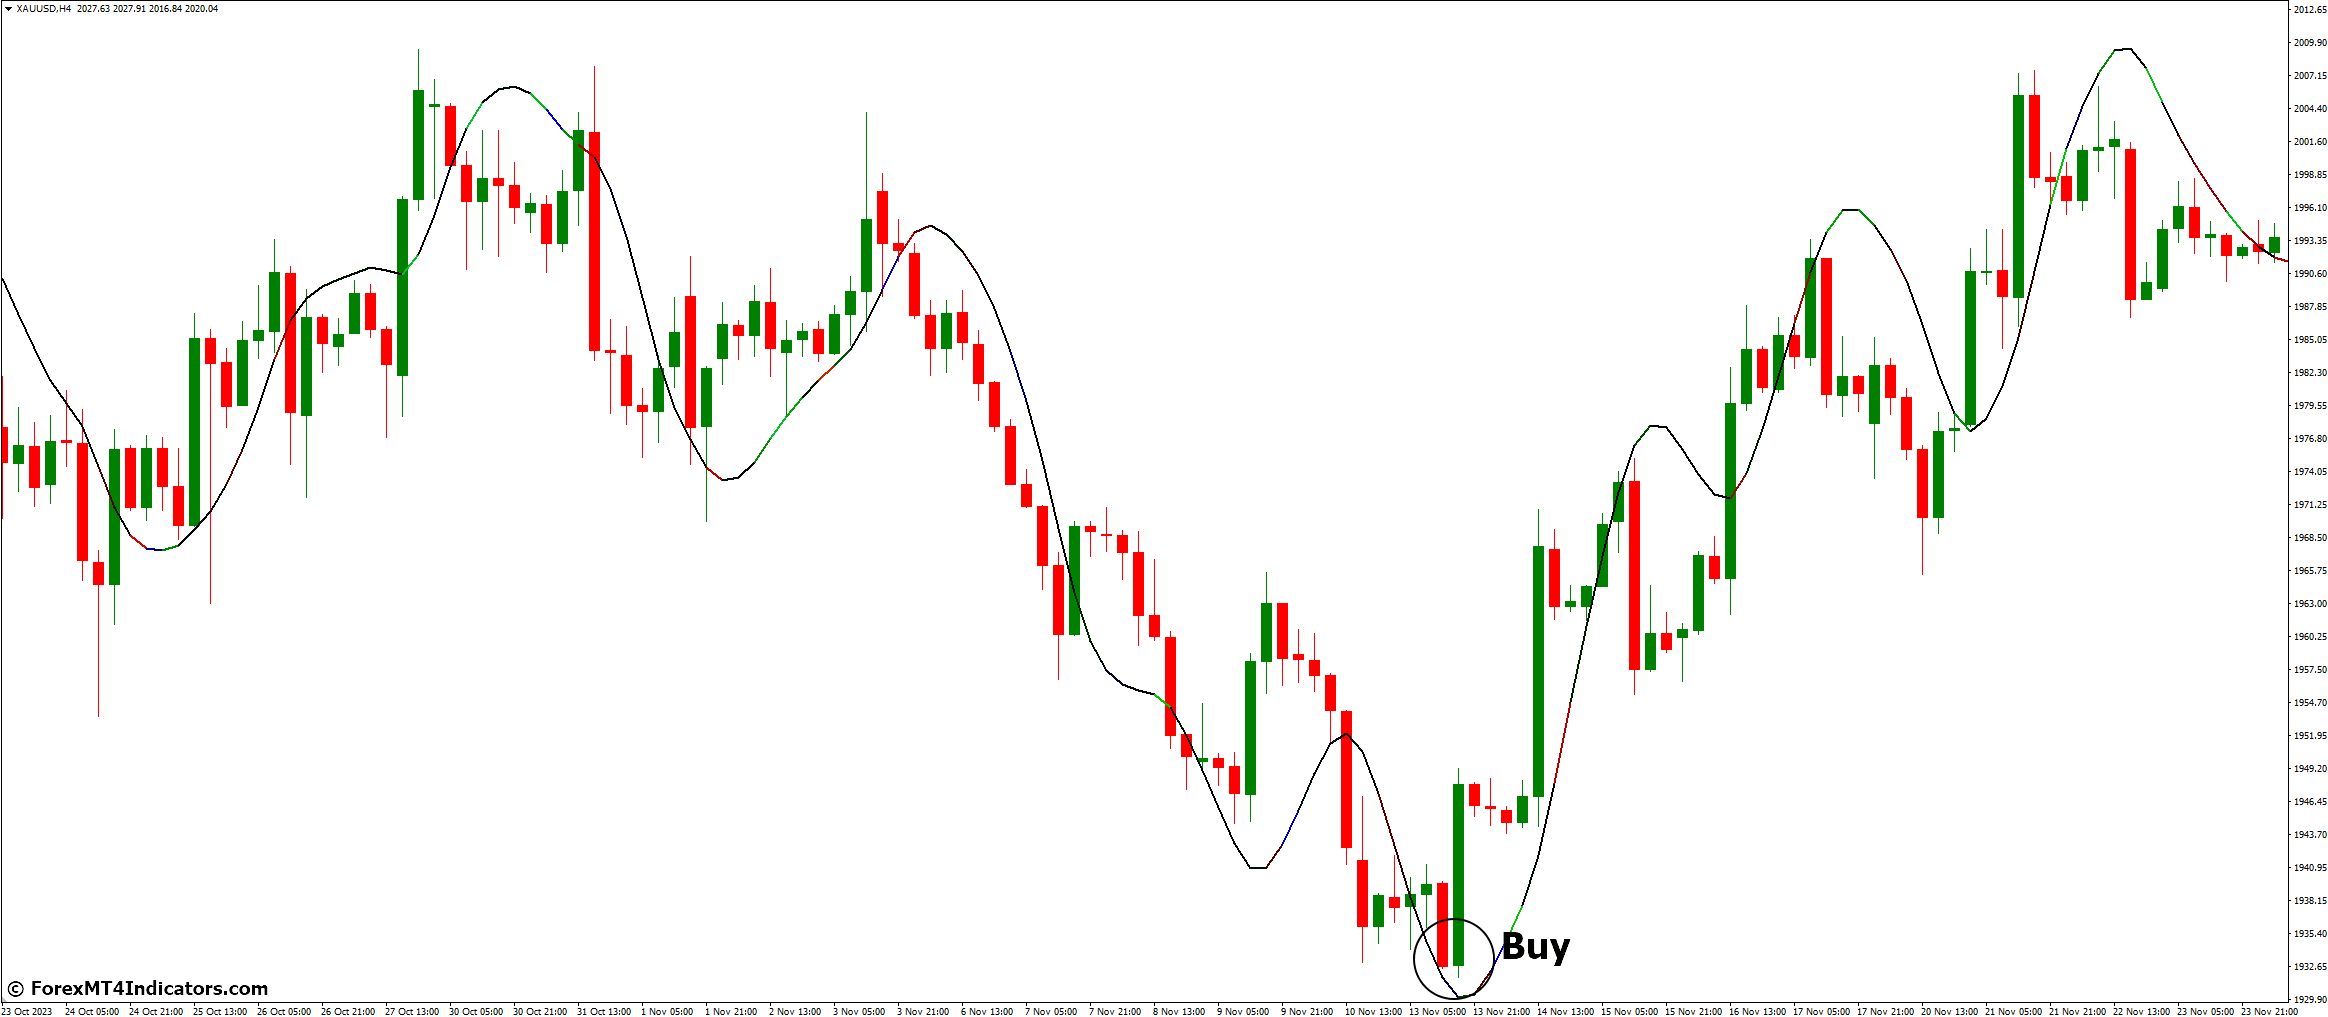 How to Trade with Pretty T3 Indicator - Buy Entry